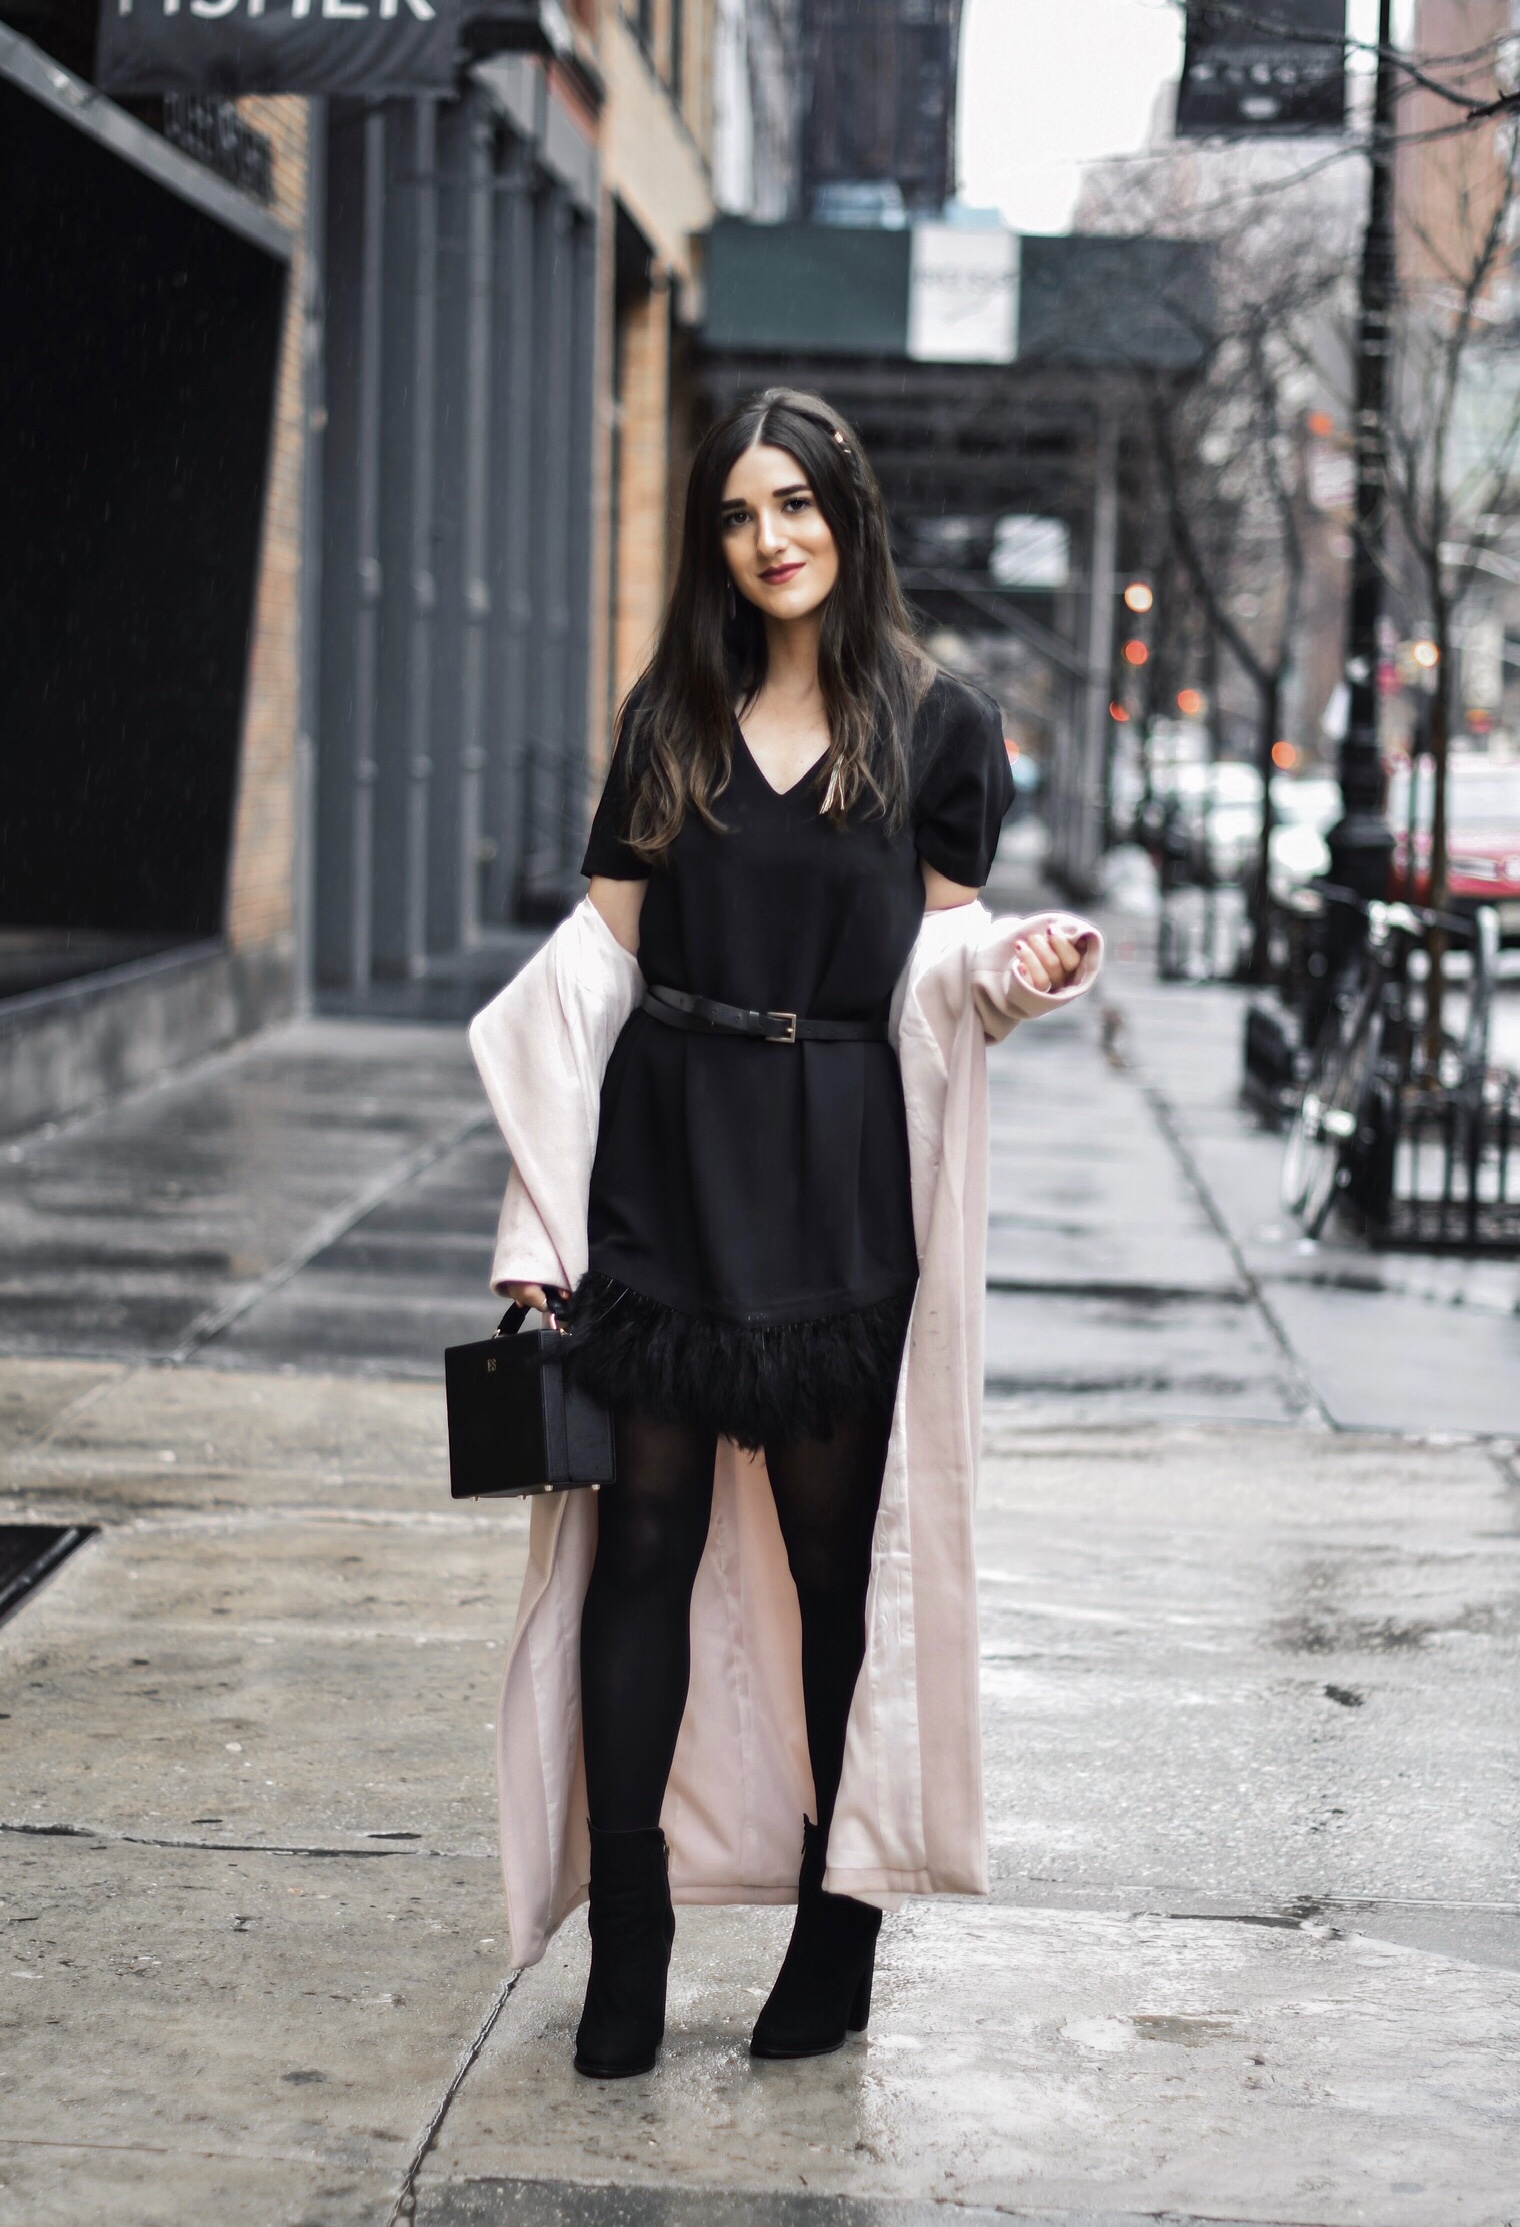 How To Stay Grounded Black Feather Trim Dress Long Pink Coat Esther Santer Fashion Blog NYC Street Style Blogger Outfit OOTD Trendy Saks Off 5th Feather Trim Dress Black Tights Booties M4D3 Shoes ASOS Belt Blush Box Clutch Bag Shop  Wear Cozy Winter.jpg